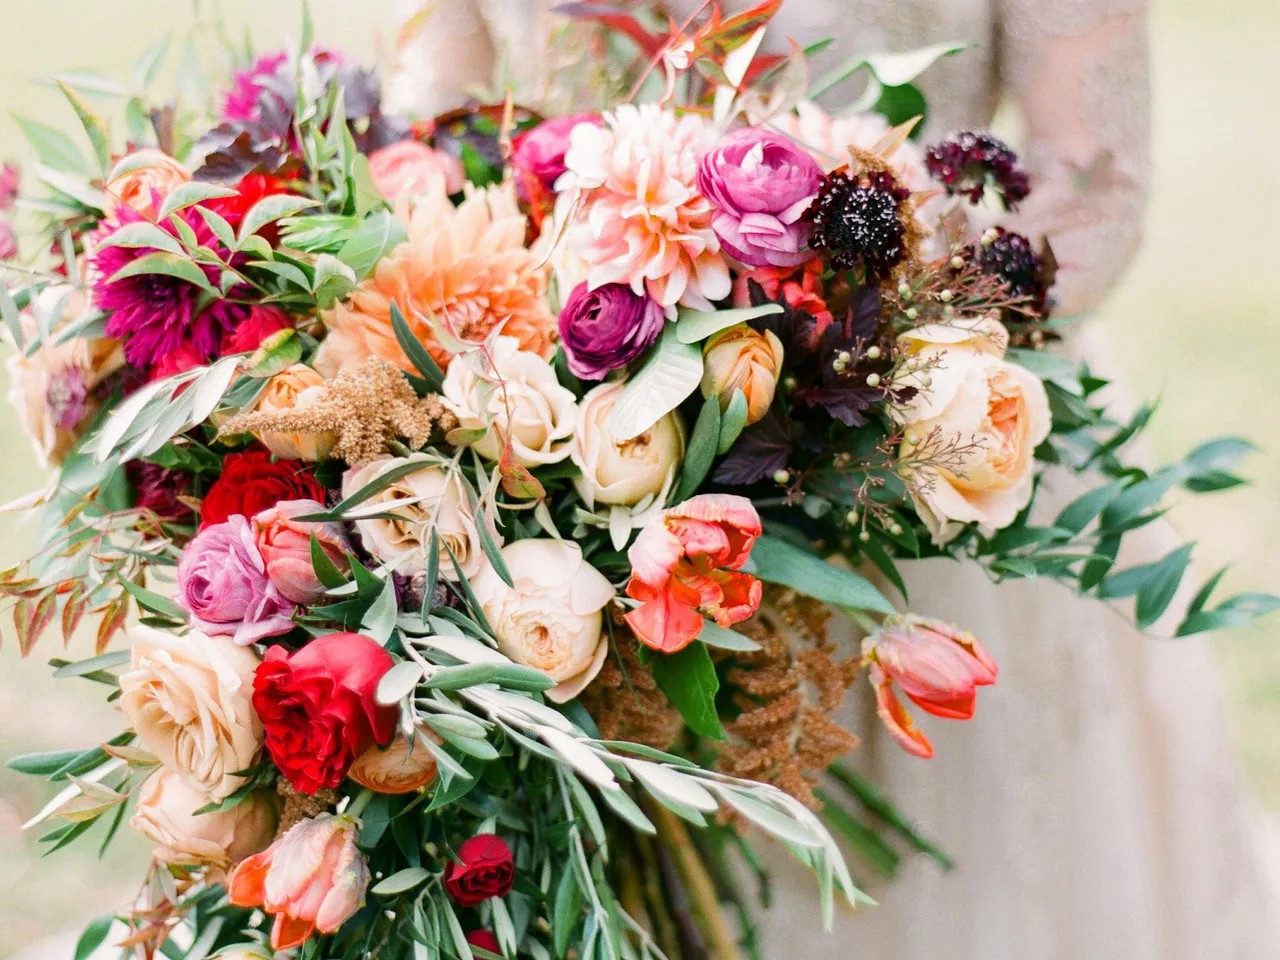 What Do Your Wedding Flowers Represents: The Most Beautiful Wedding Flowers And The Significance Of Wedding Flowers